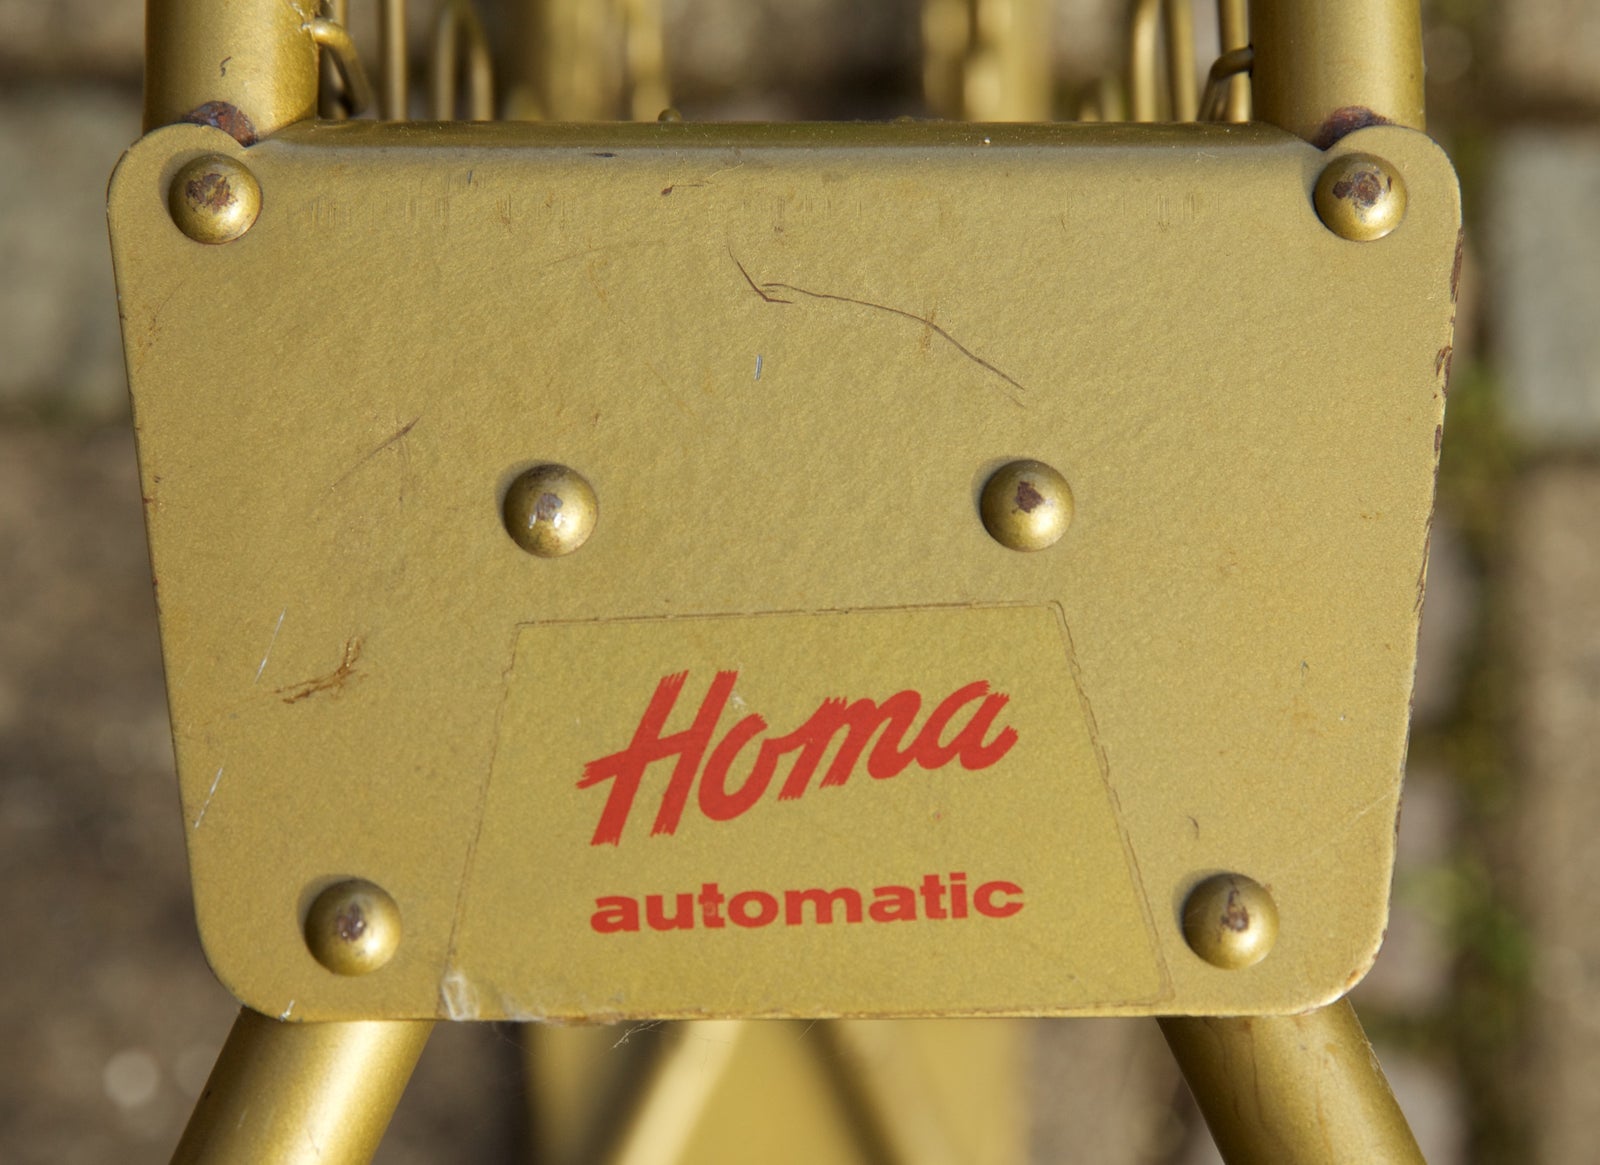 Andet, Homa Automatic, b: 70 l: 190 h: 25